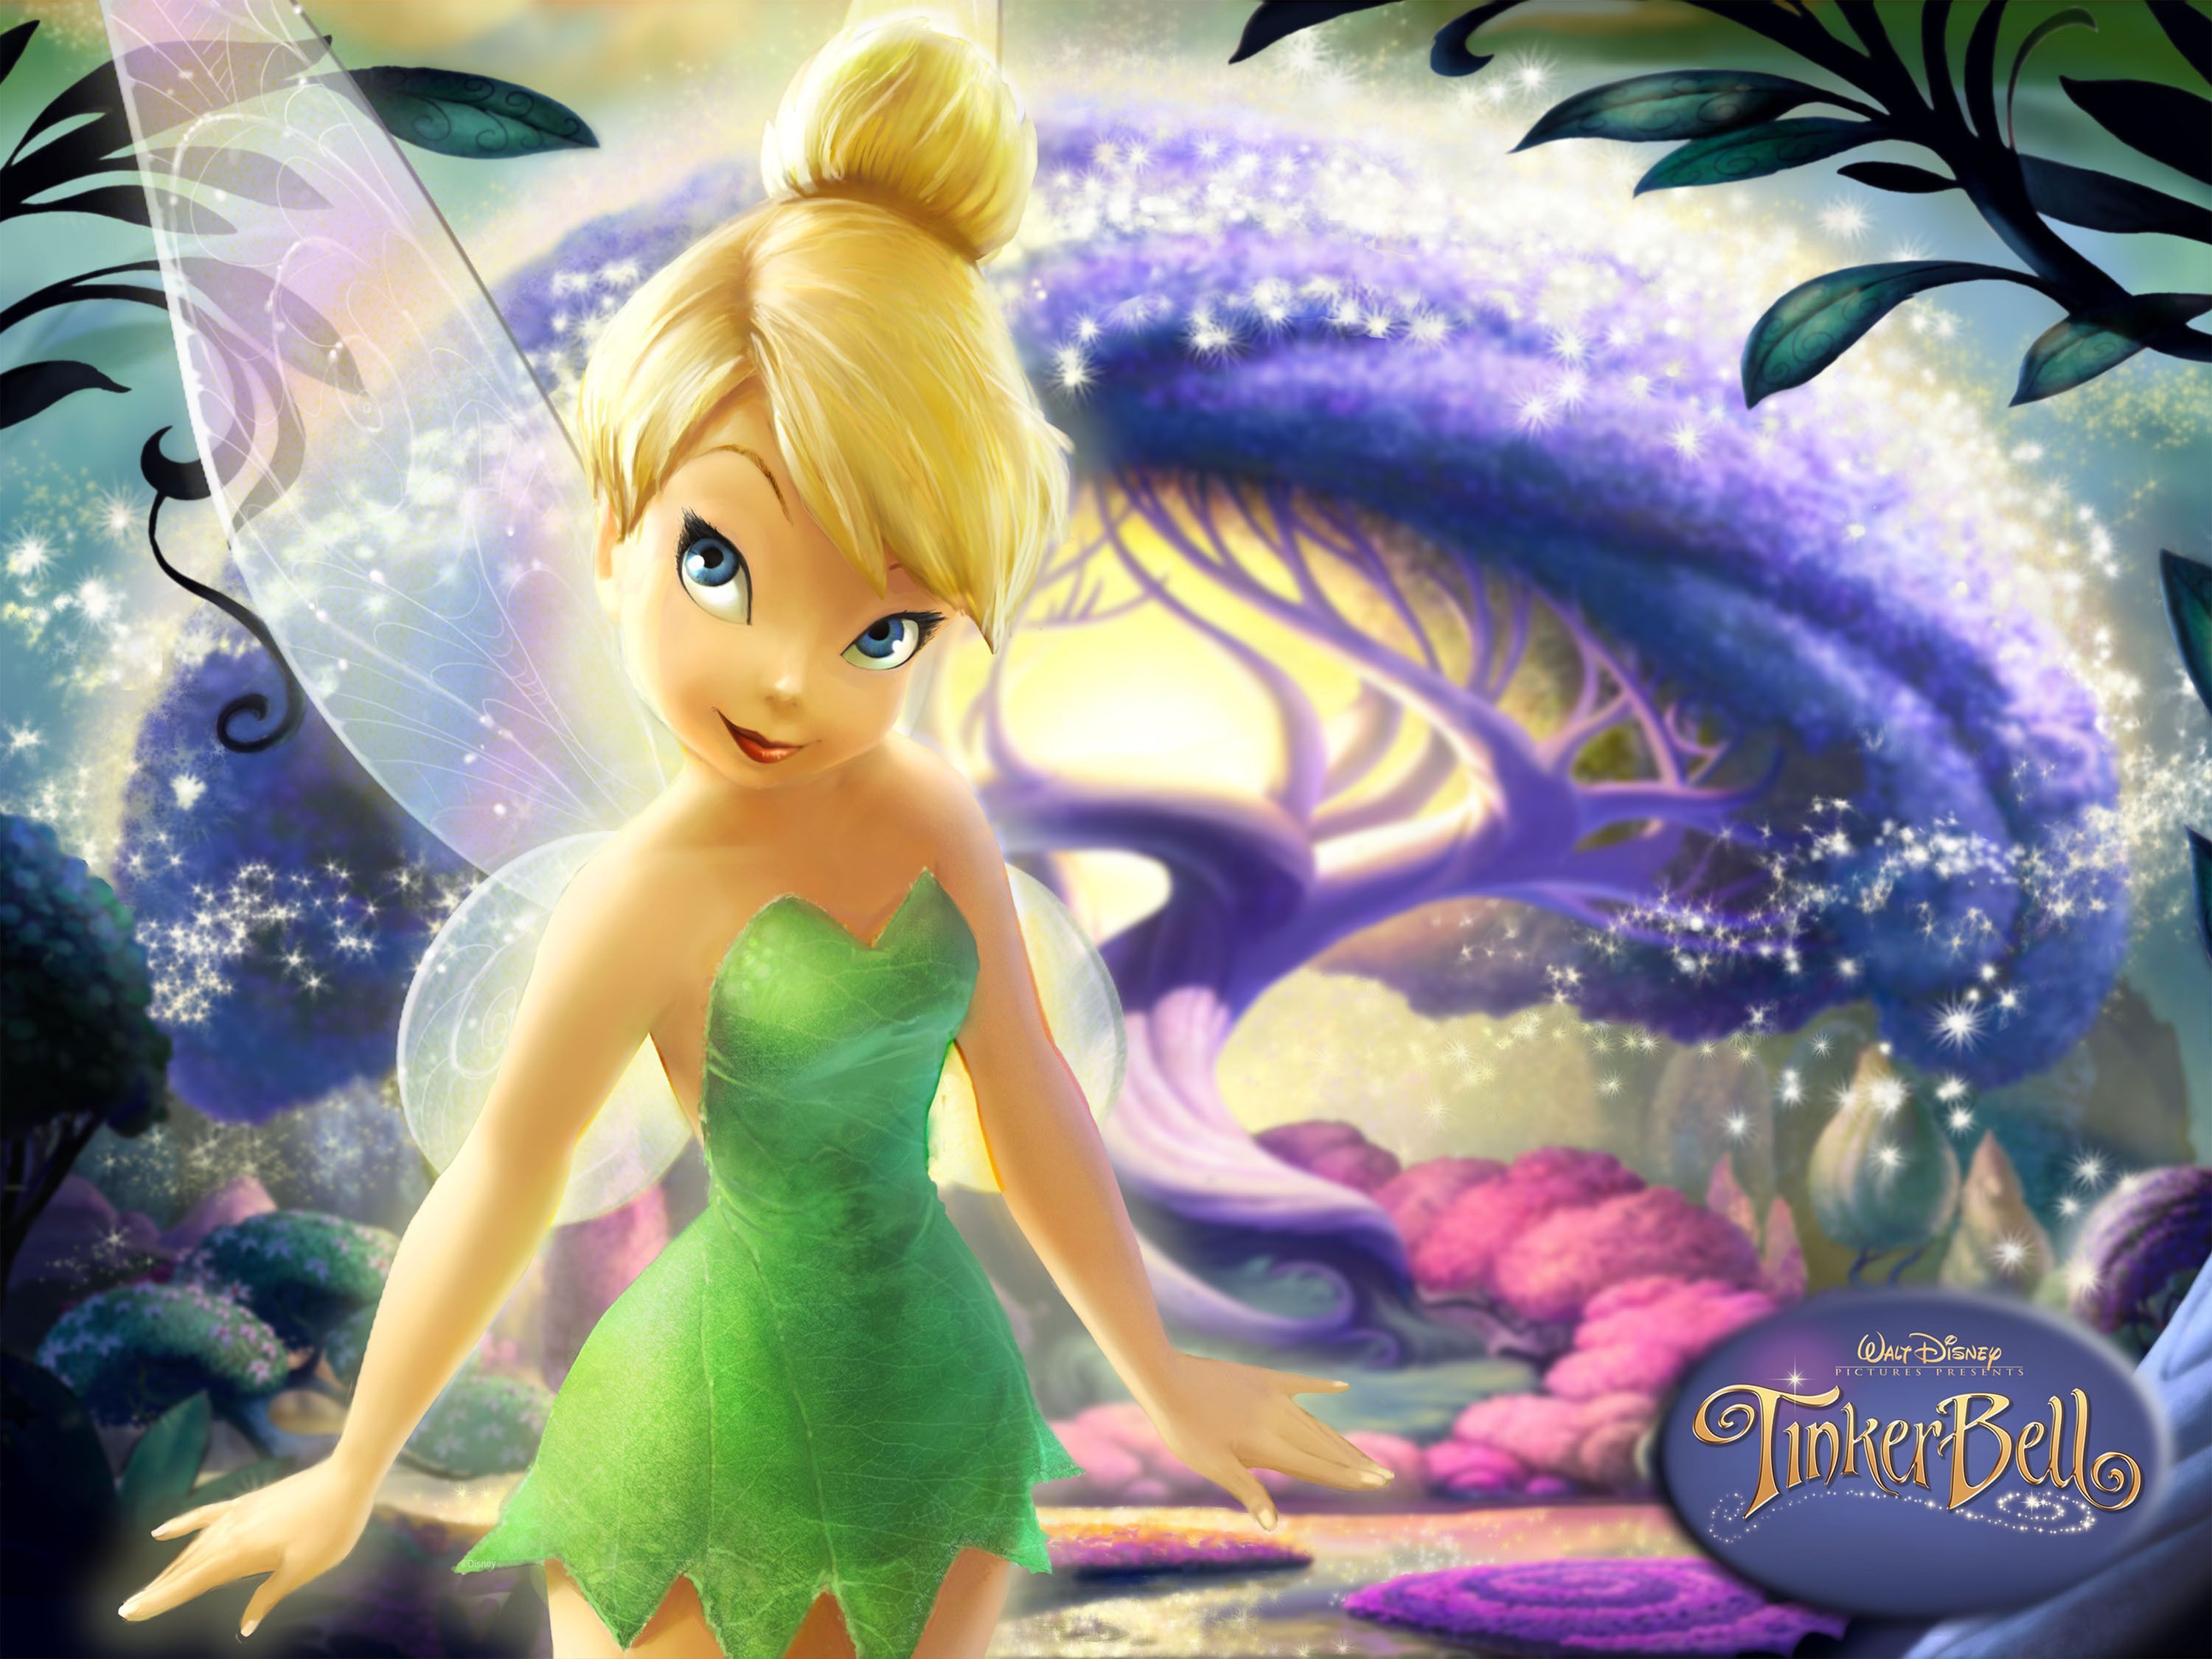 𝐔𝐋𝐋𝐘 𝐕𝐈𝐂𝐓𝐎𝐑𝐈𝐀  Wallpaper Tinkerbell and Fawn by zeustya  